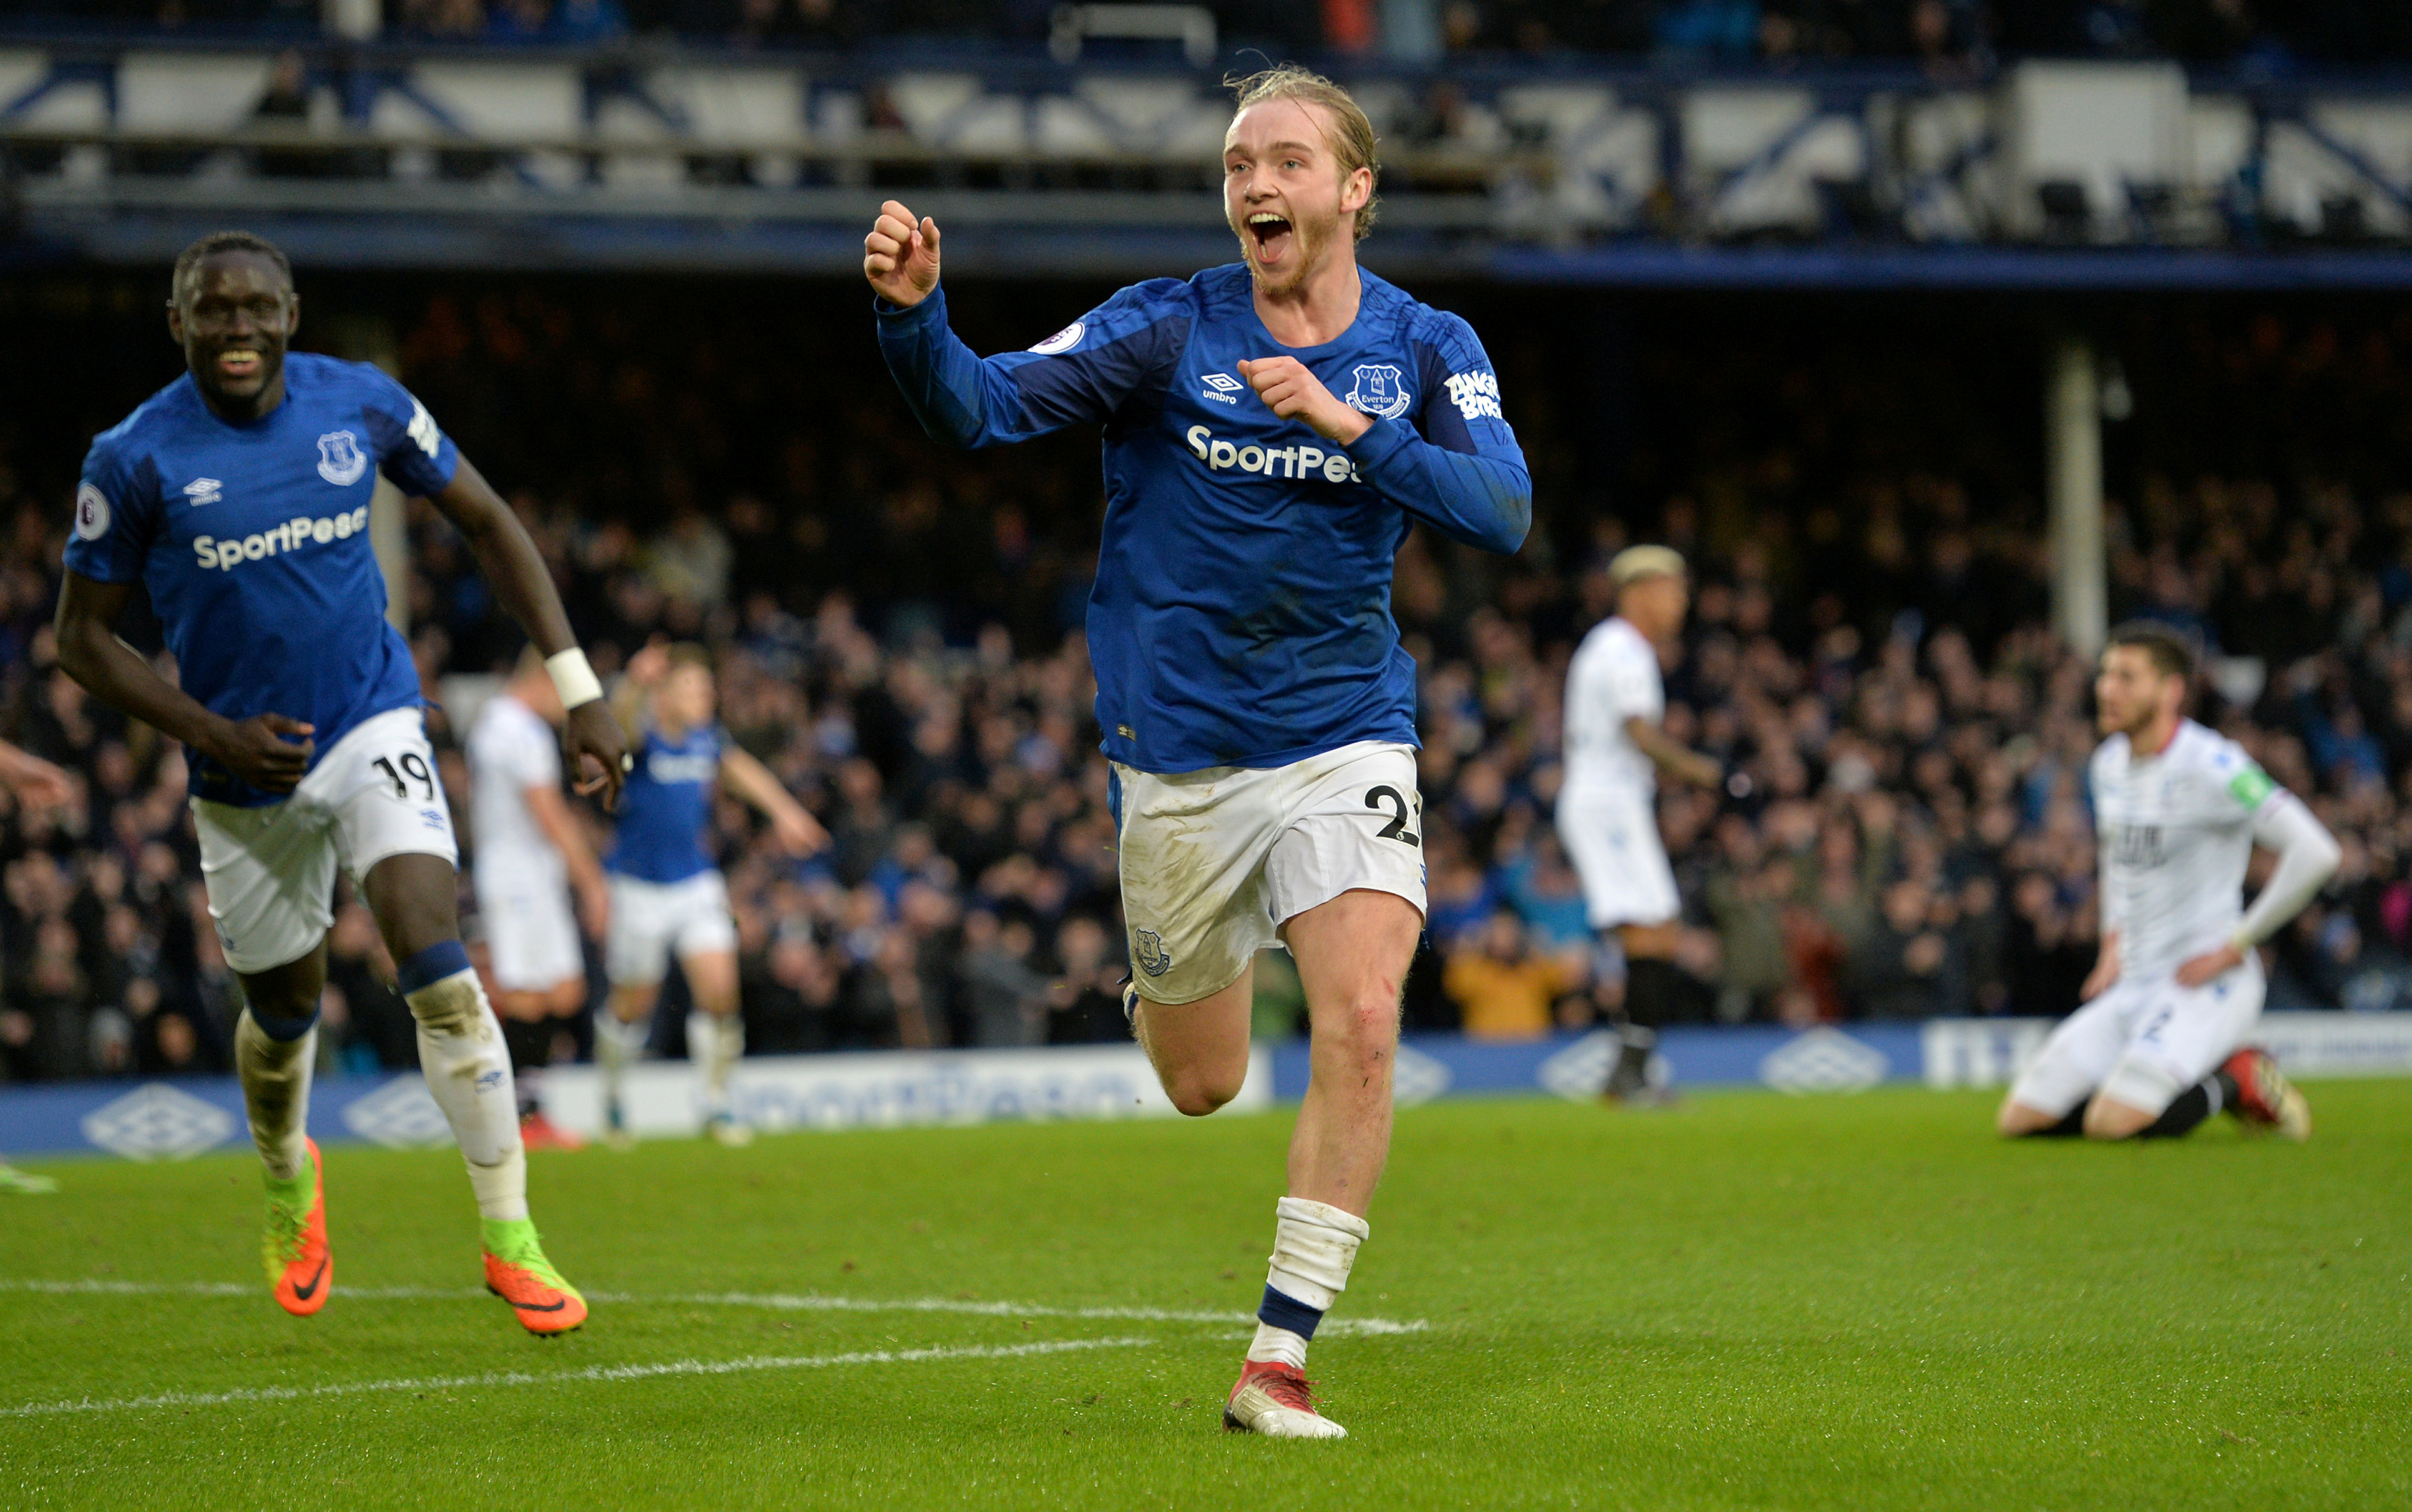 Everton up to ninth with easy win over Palace